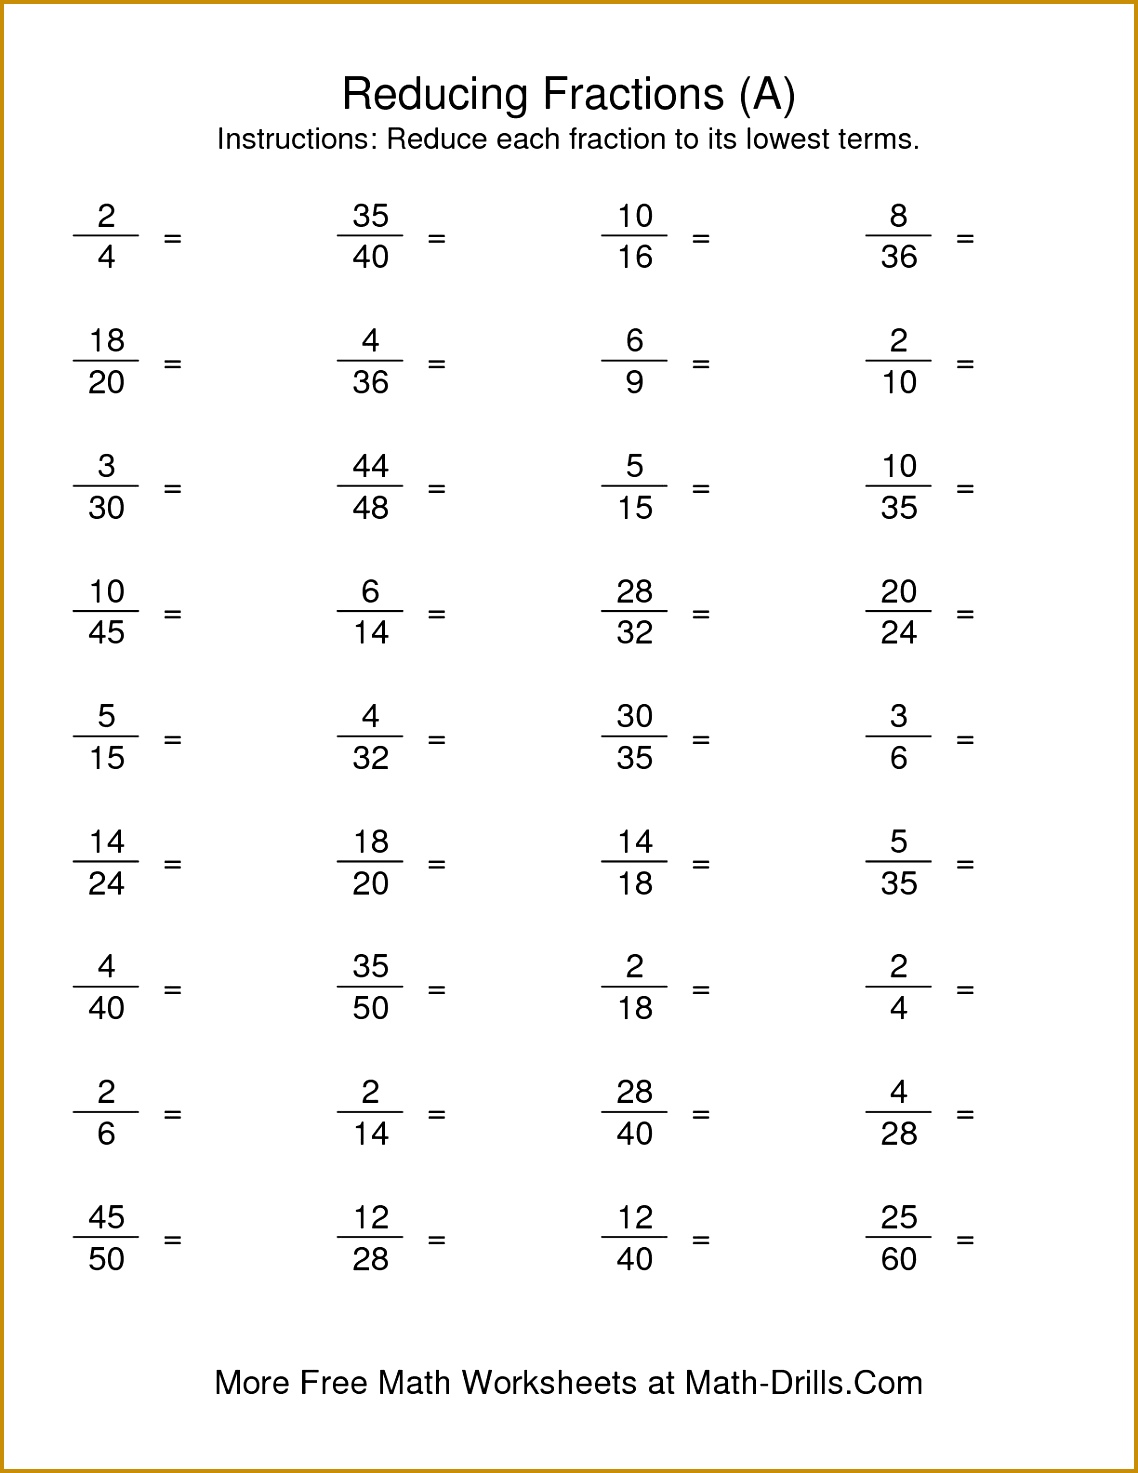 The Reducing Fractions to Lowest Terms A math worksheet from the Fractions Worksheet page 14731138